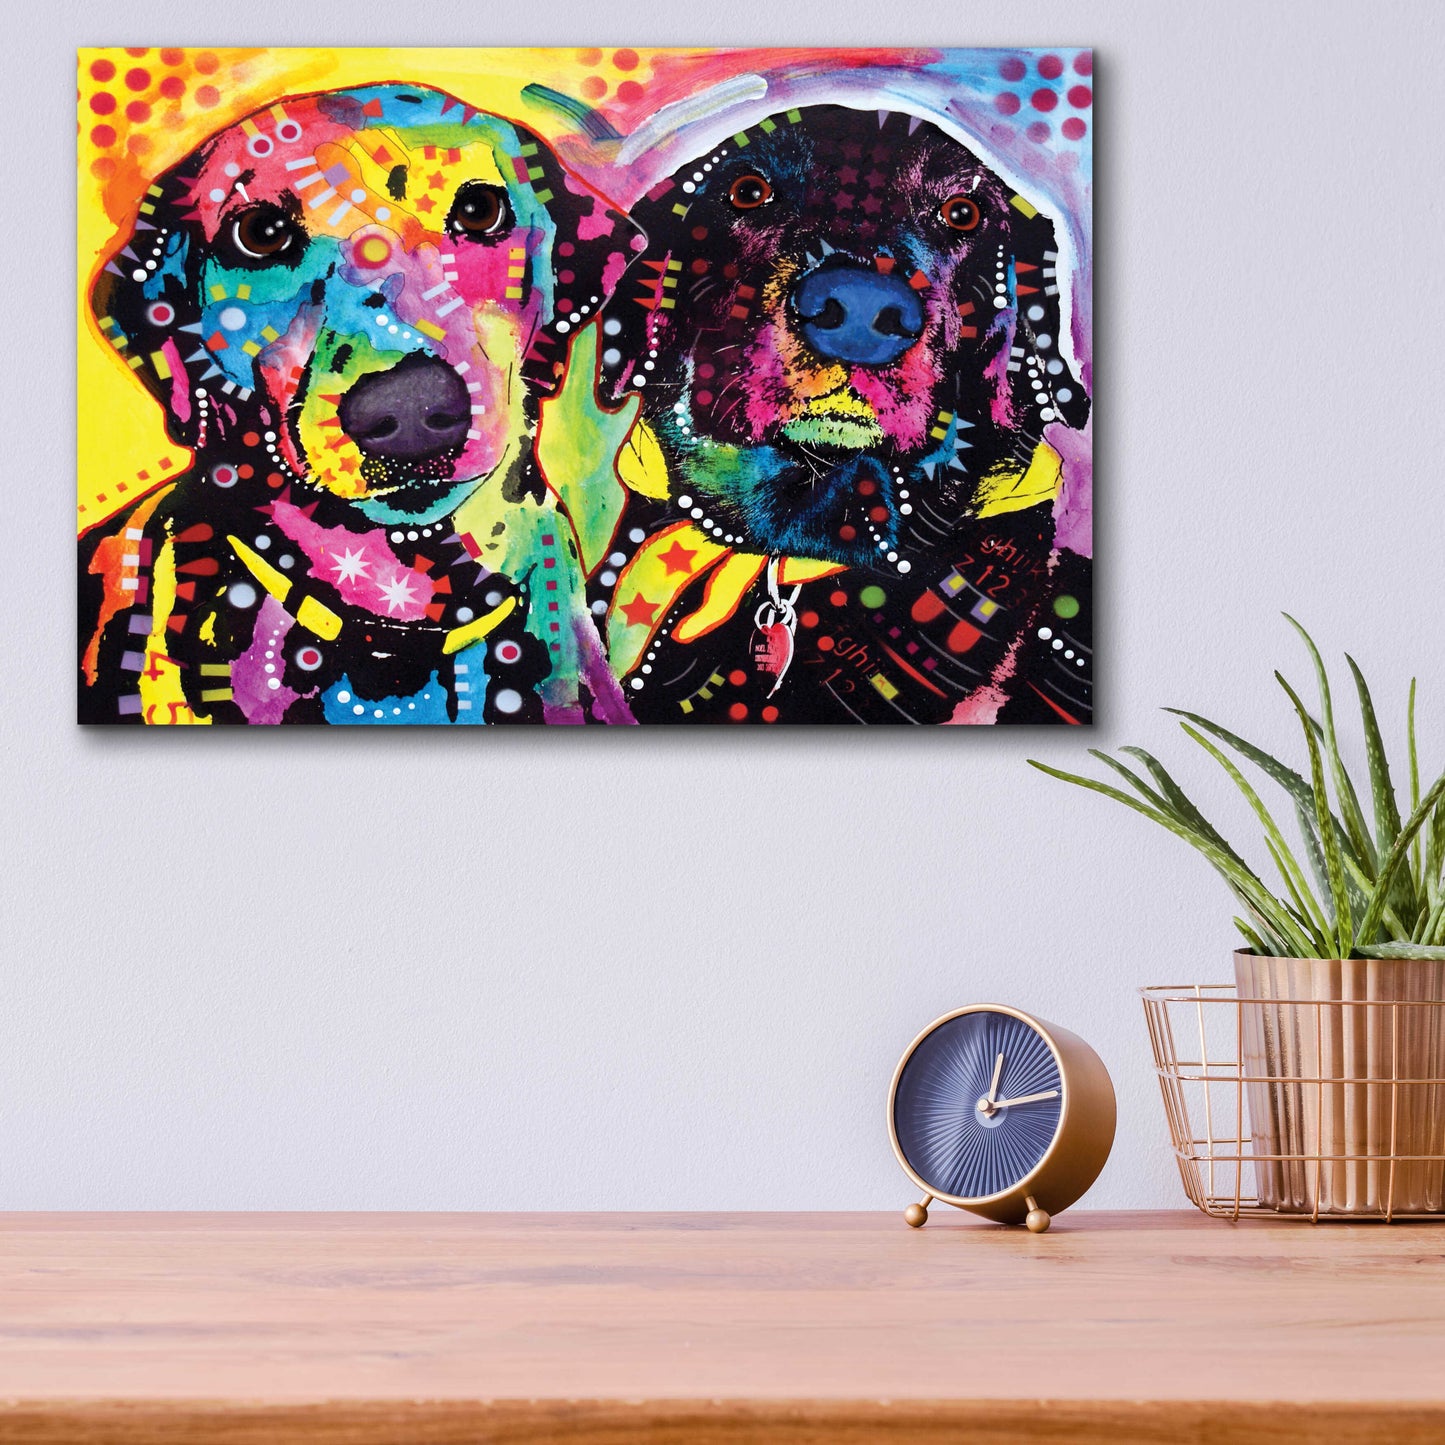 Epic Art 'Daisy and Noel' by Dean Russo, Acrylic Glass Wall Art,16x12